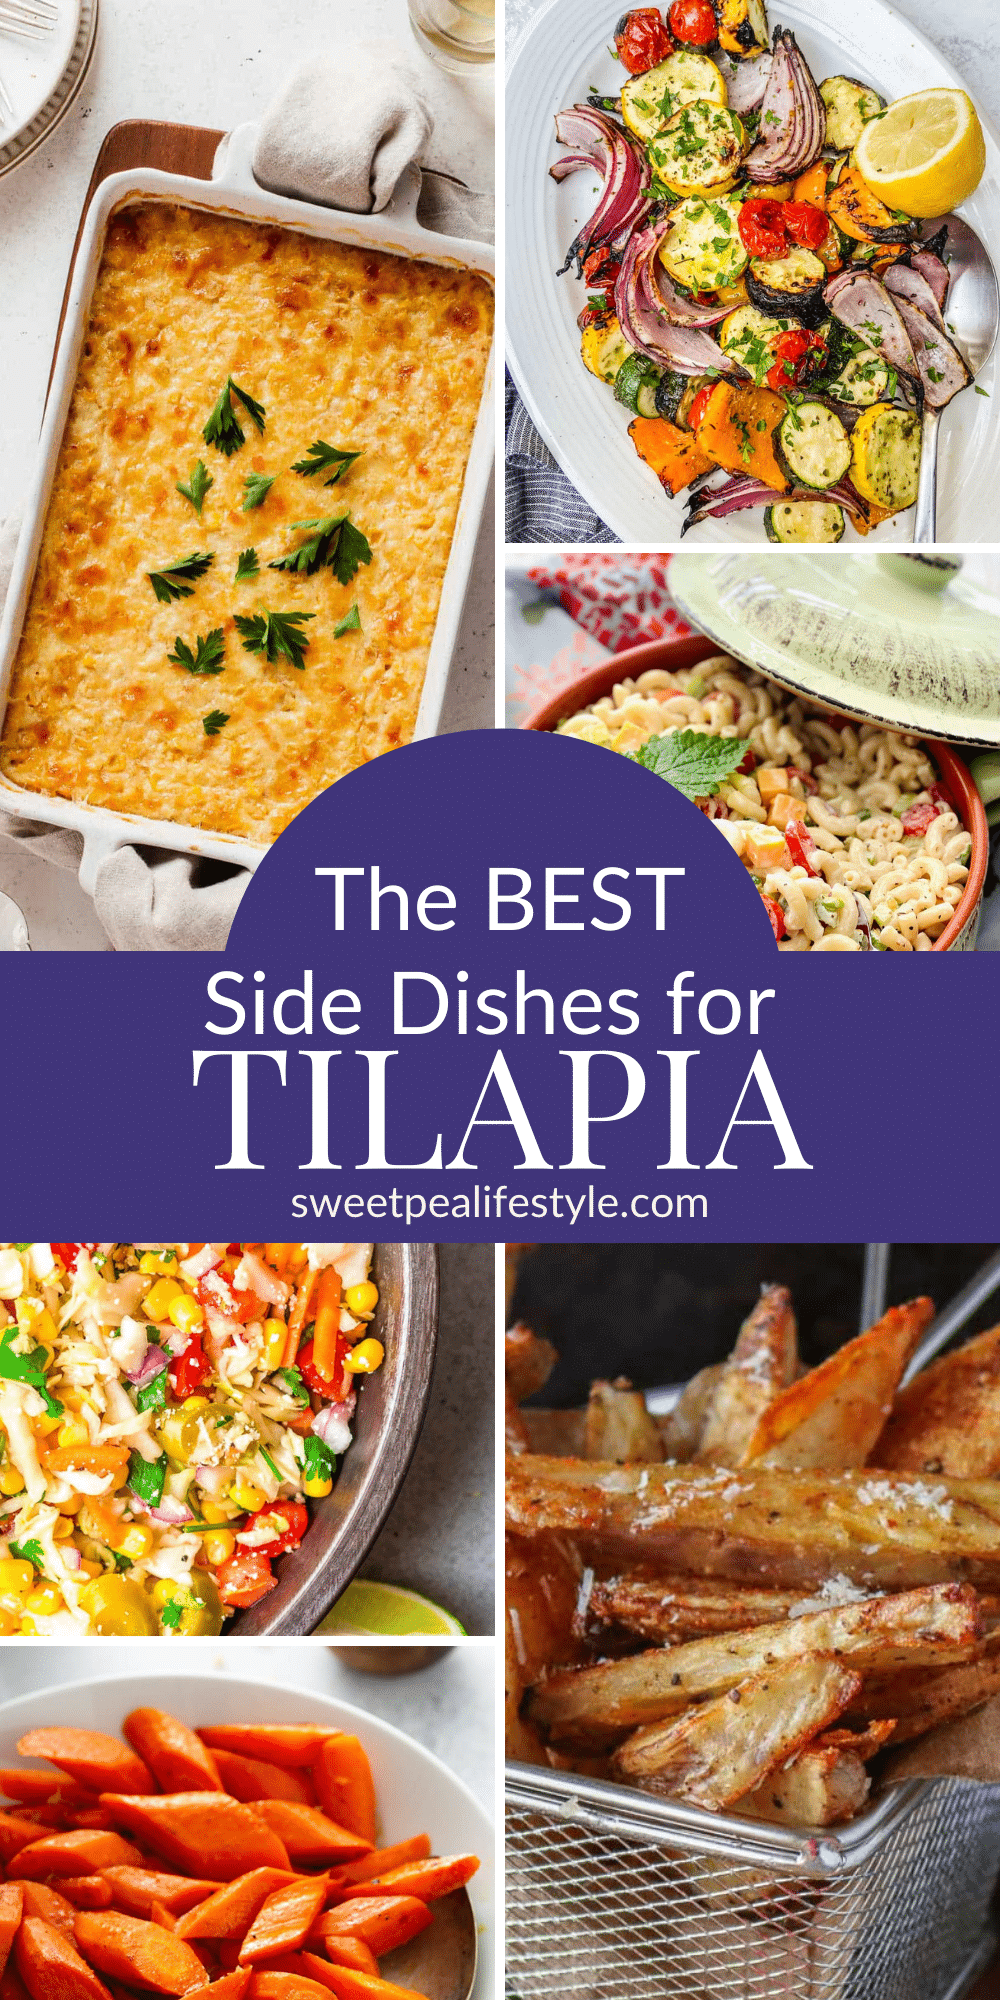 The Best Side Dishes for Tilapia